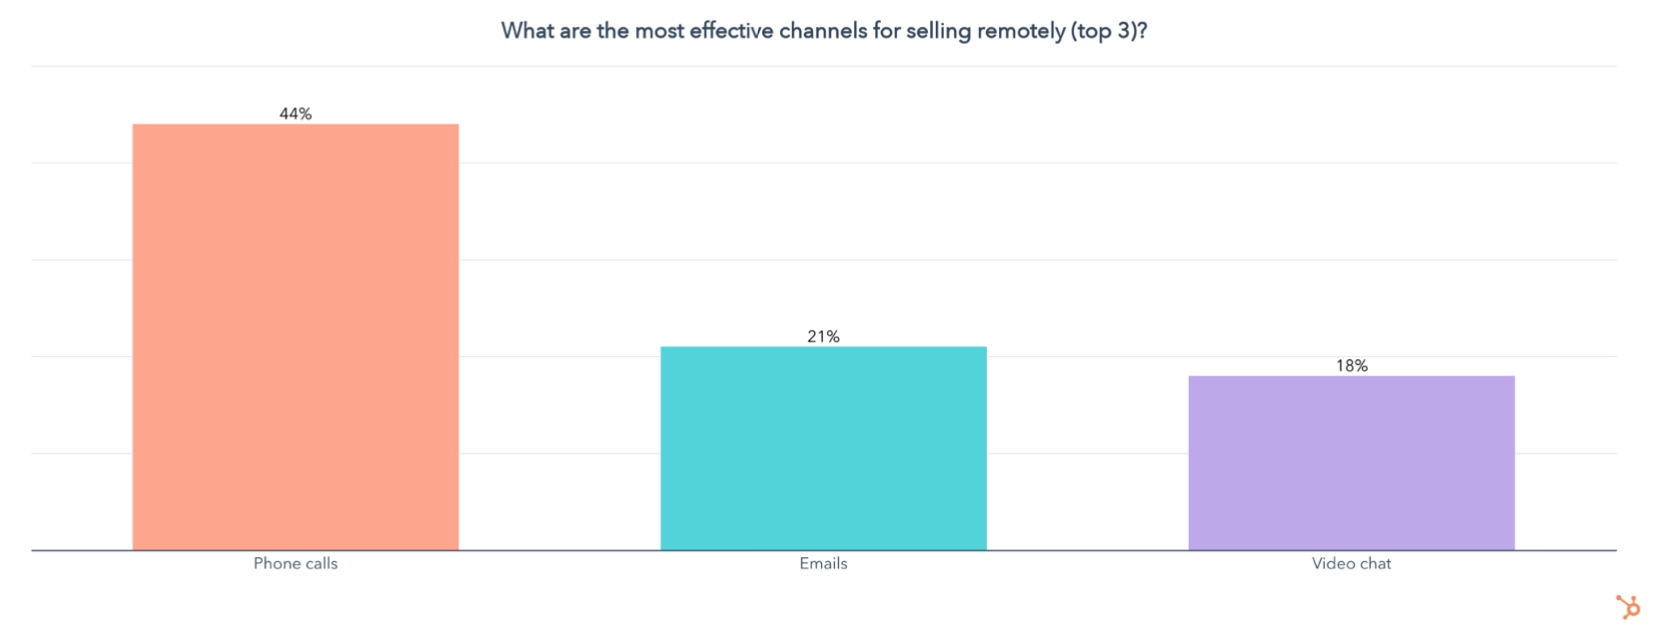 Top methods for selling remotely